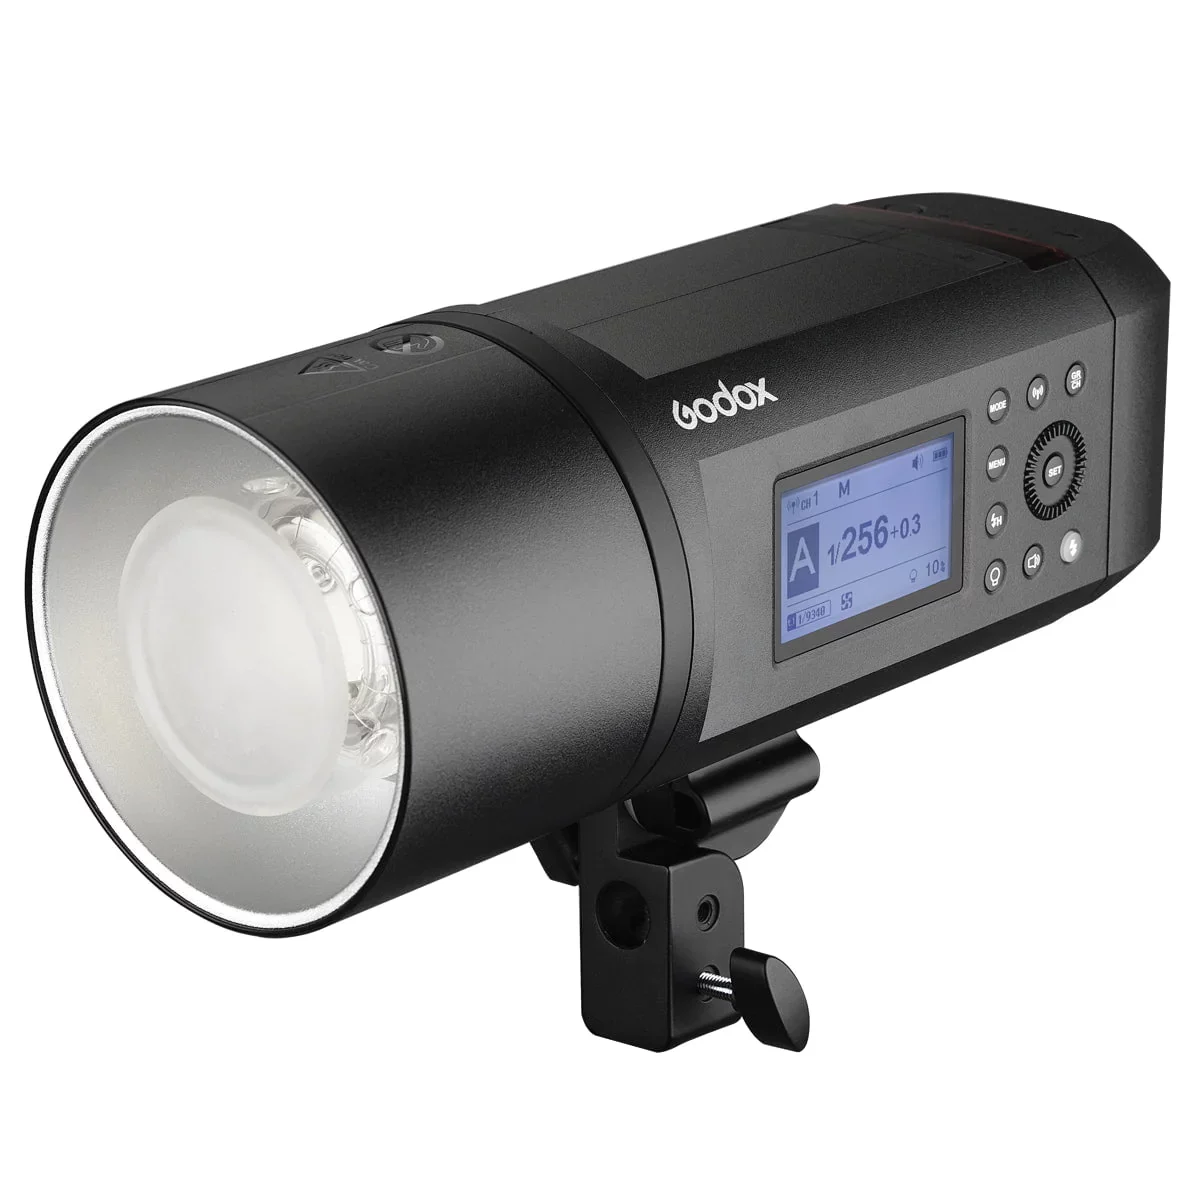 Godox IS My Choice of Lighting for Photography